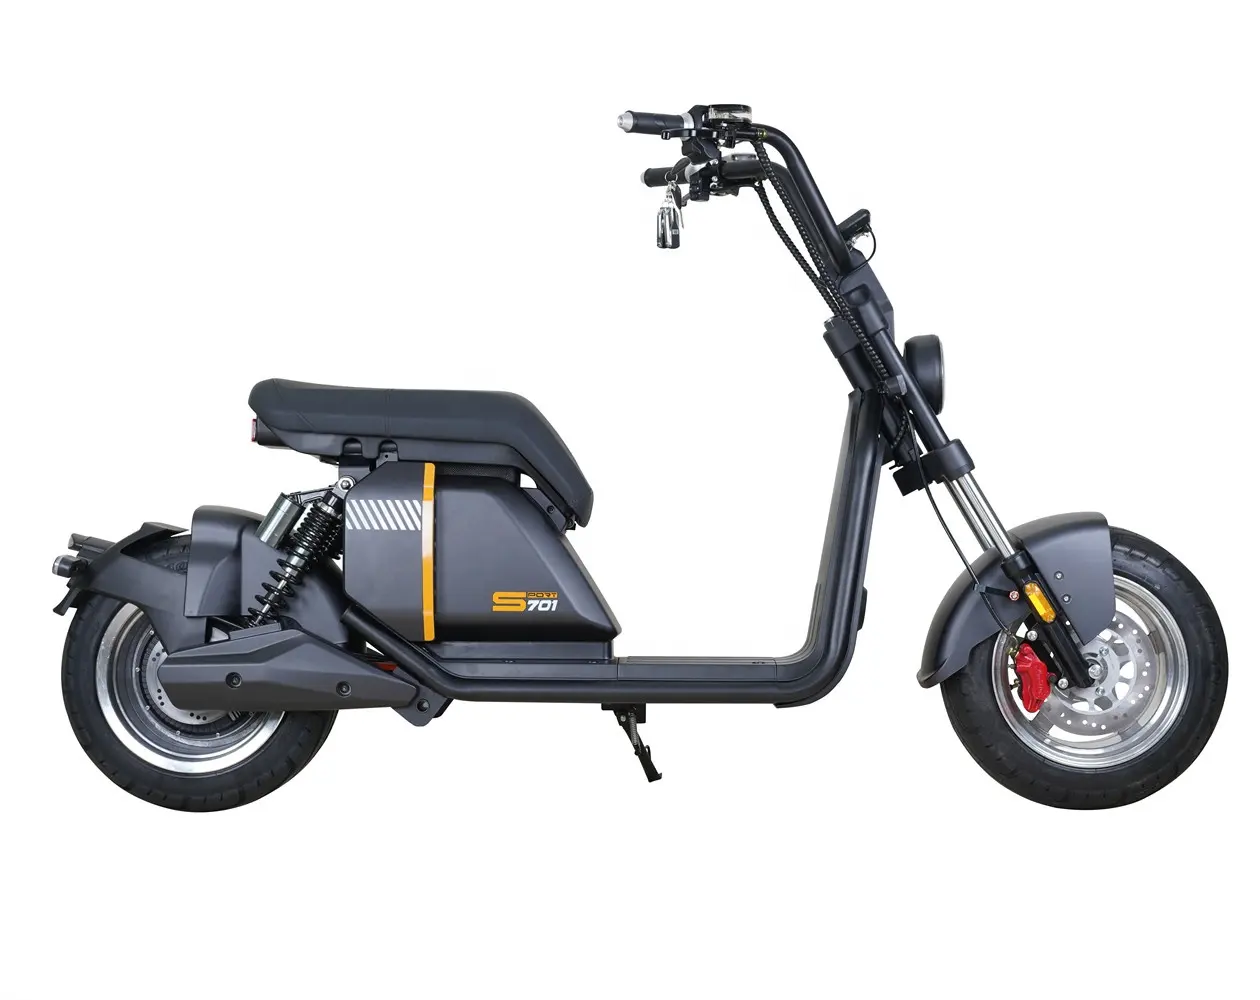 European warehouse Electric Scooters Sport 701 Citycoco Scooter with EEC 45 km/h Street Legal